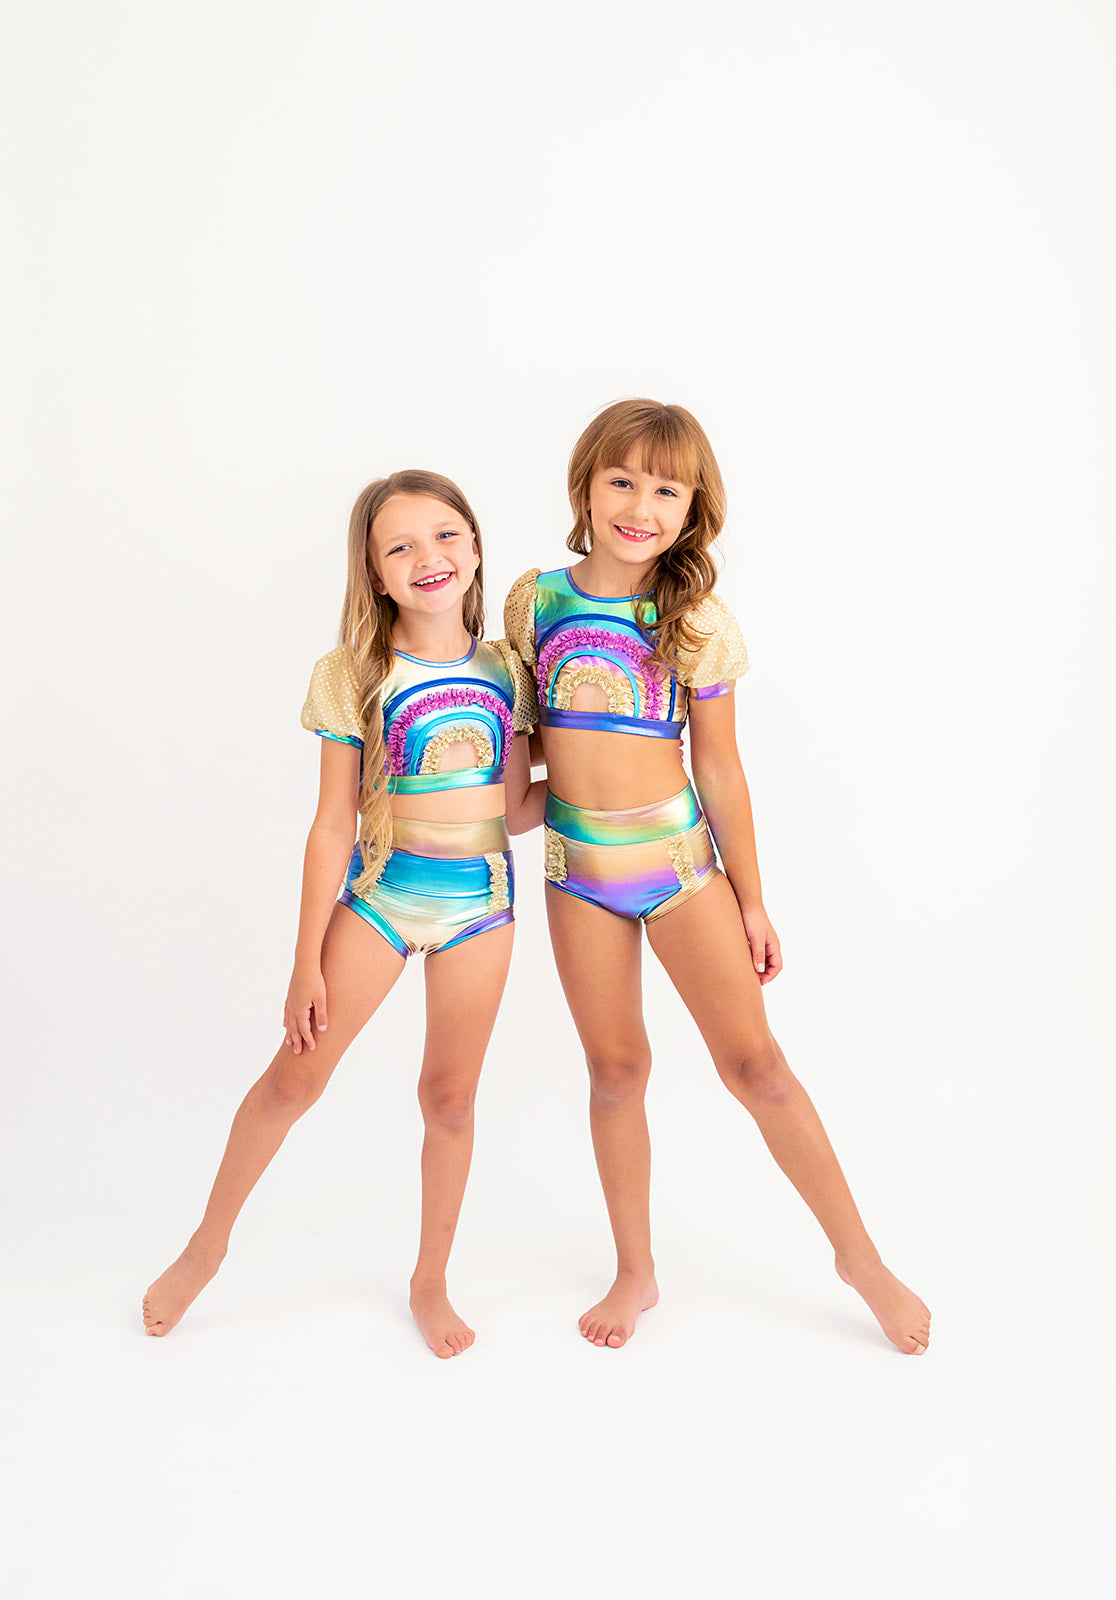 Made to Shine Metallic Multicolored Rainbow Detail Dance Top and Brief Set